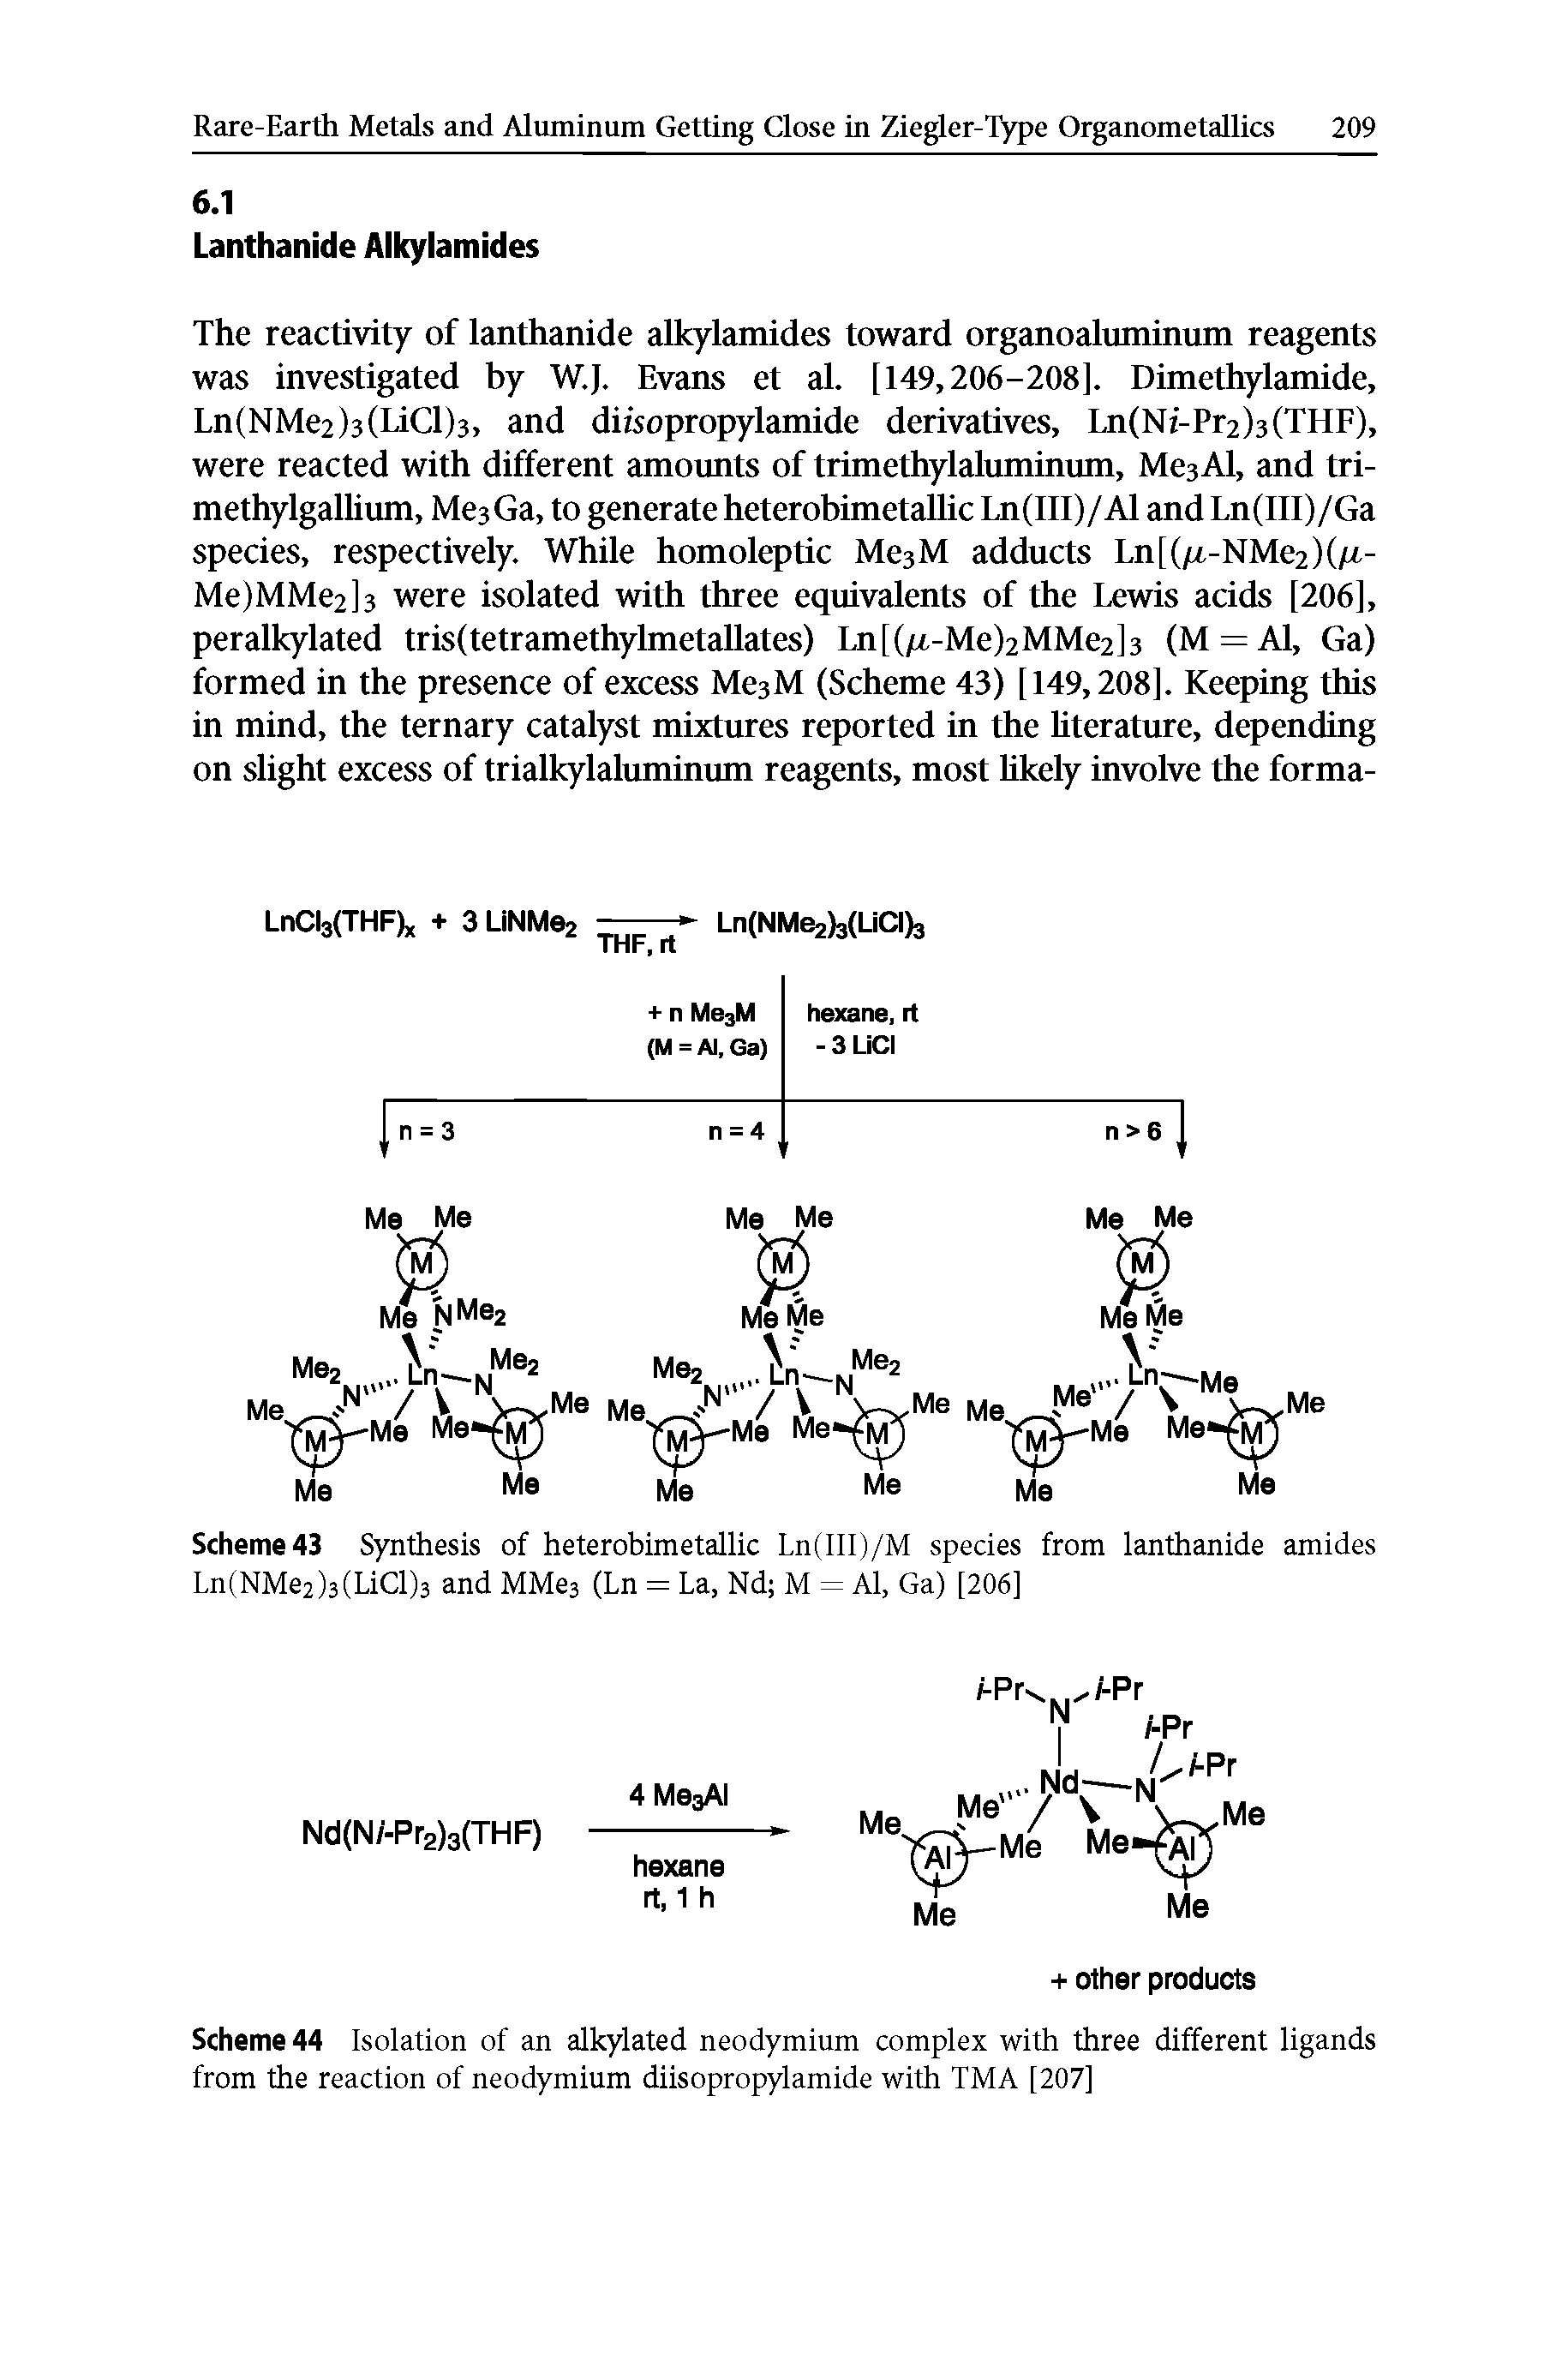 Scheme 43 Synthesis of heterobimetallic Ln(III)/M species from lanthanide amides Ln(NMe2)3(LiCl)3 and MMe3 (Ln = La, Nd M = Al, Ga) [206]...